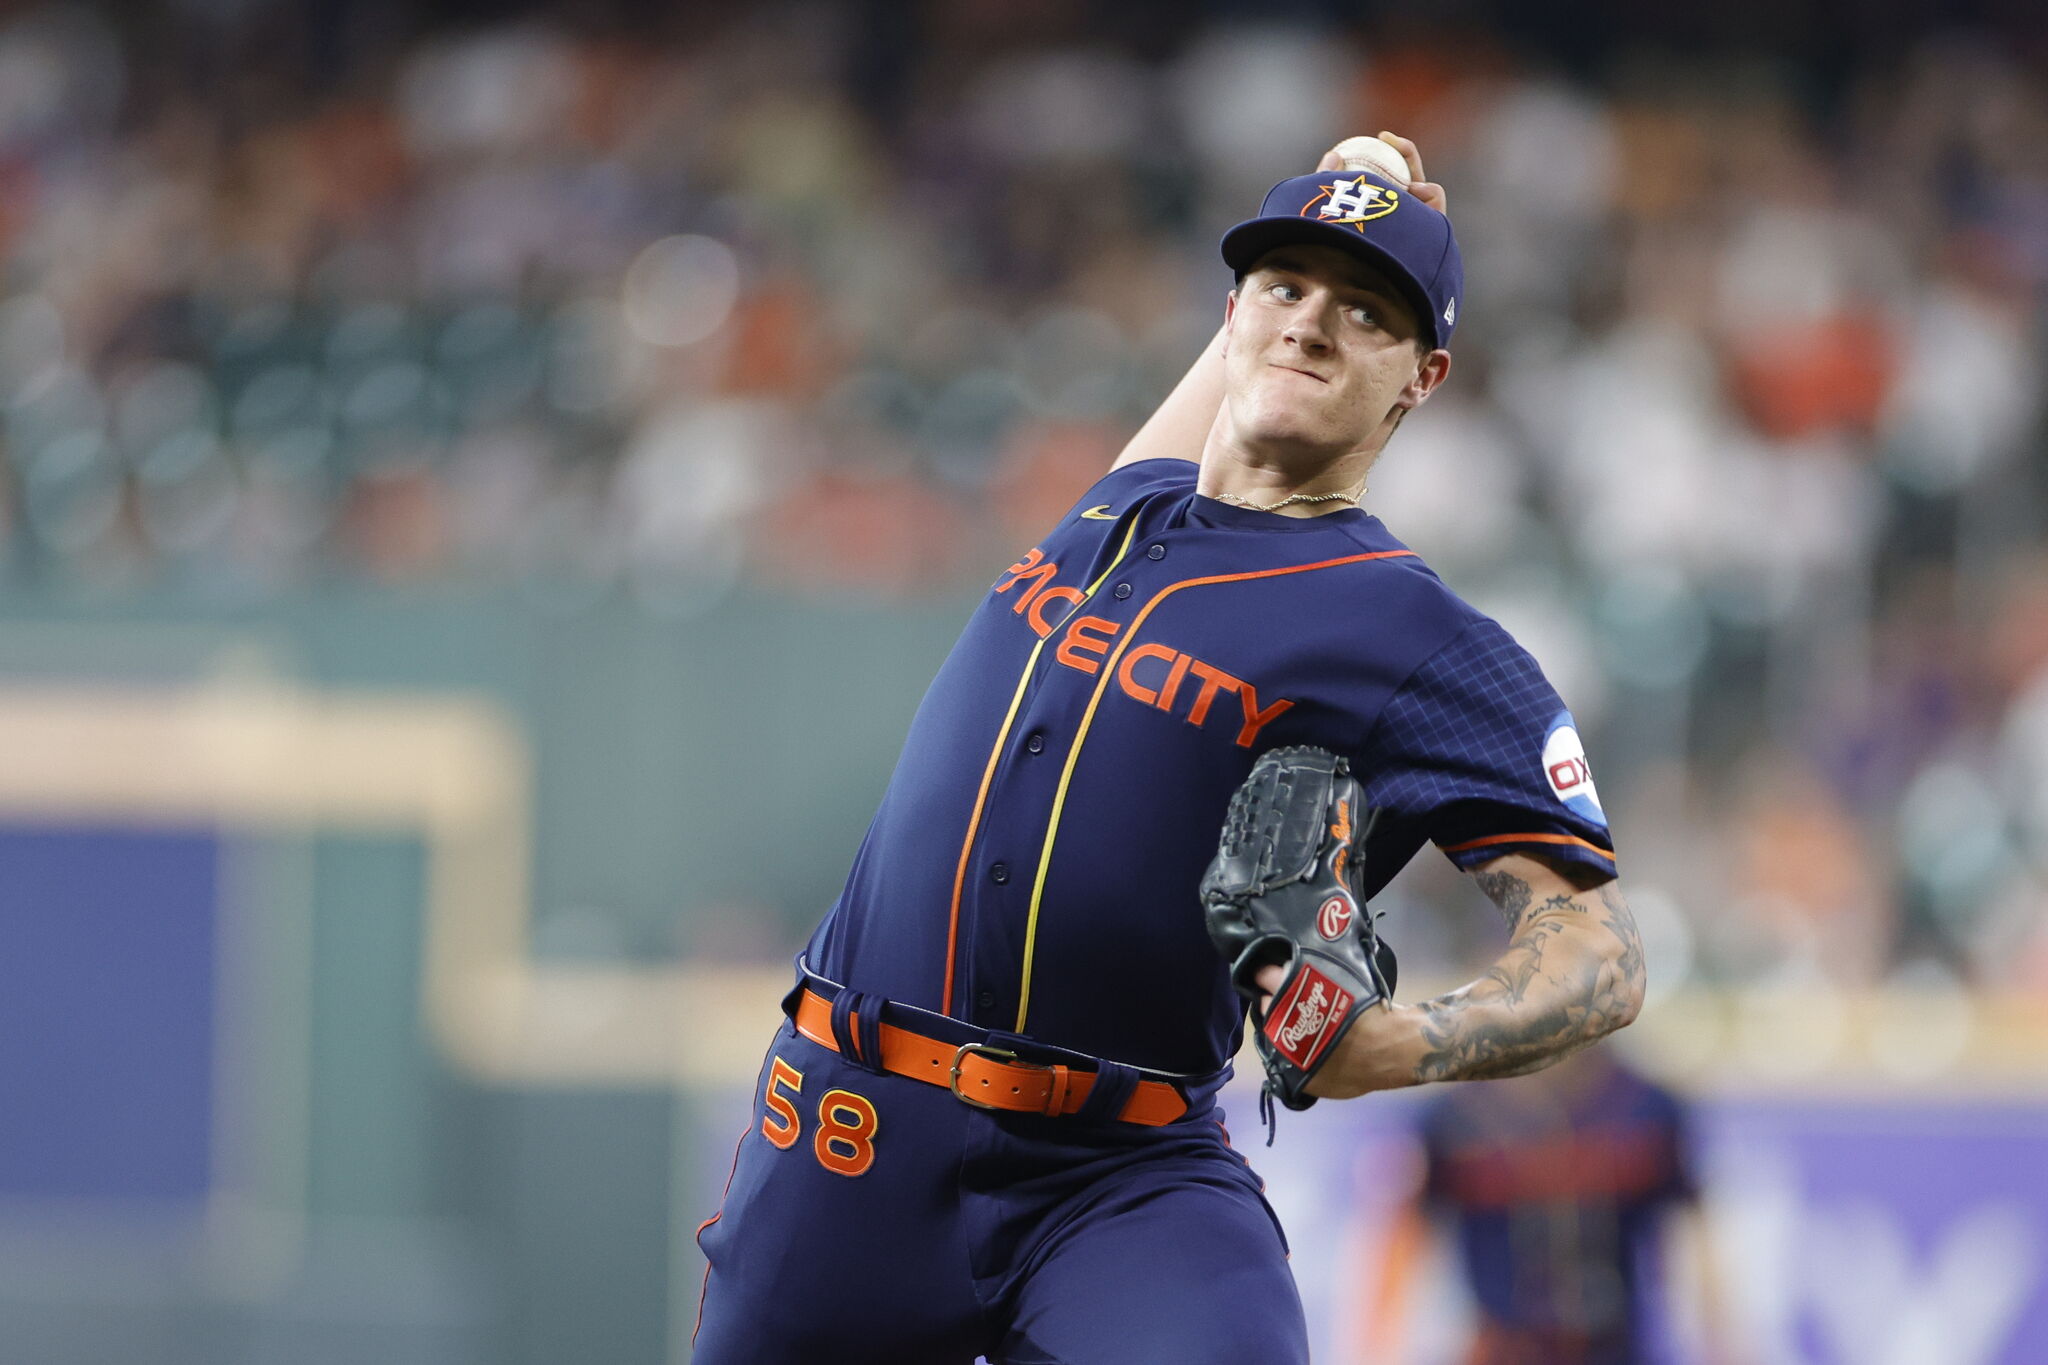 Astros' pitching depth causes concern as playoffs approach